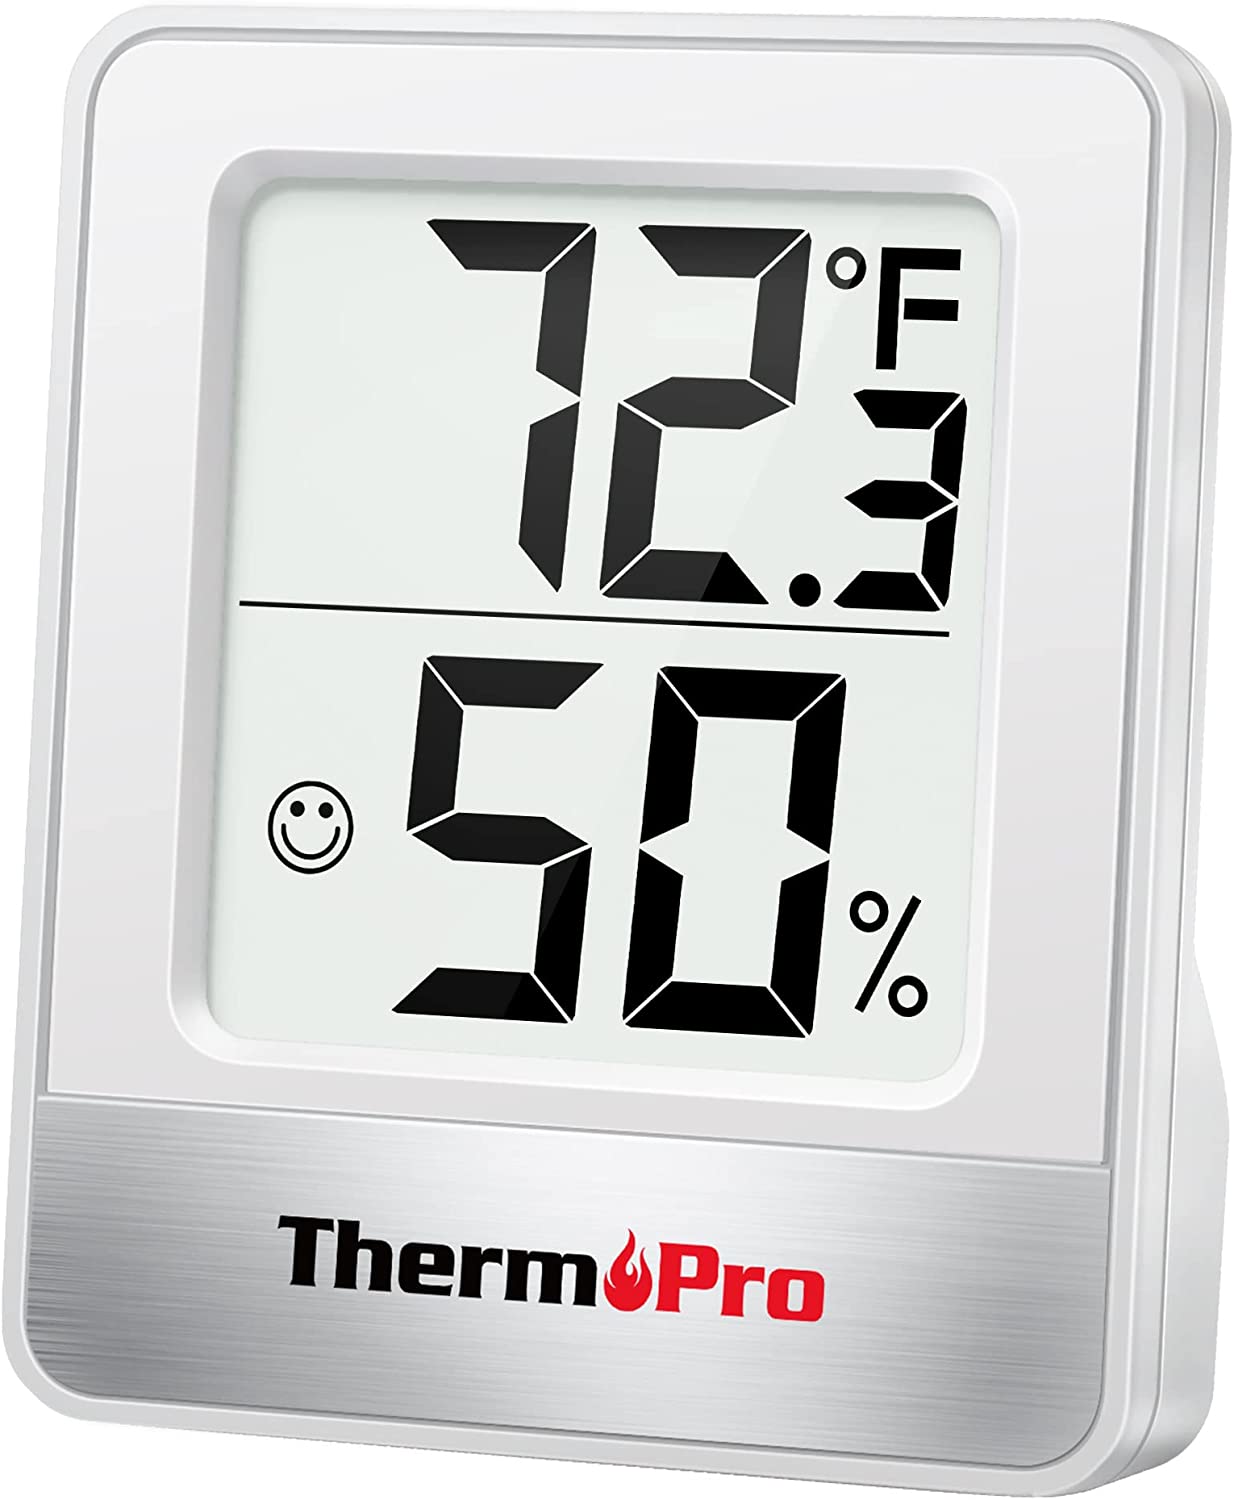 digital room thermometer product comparison